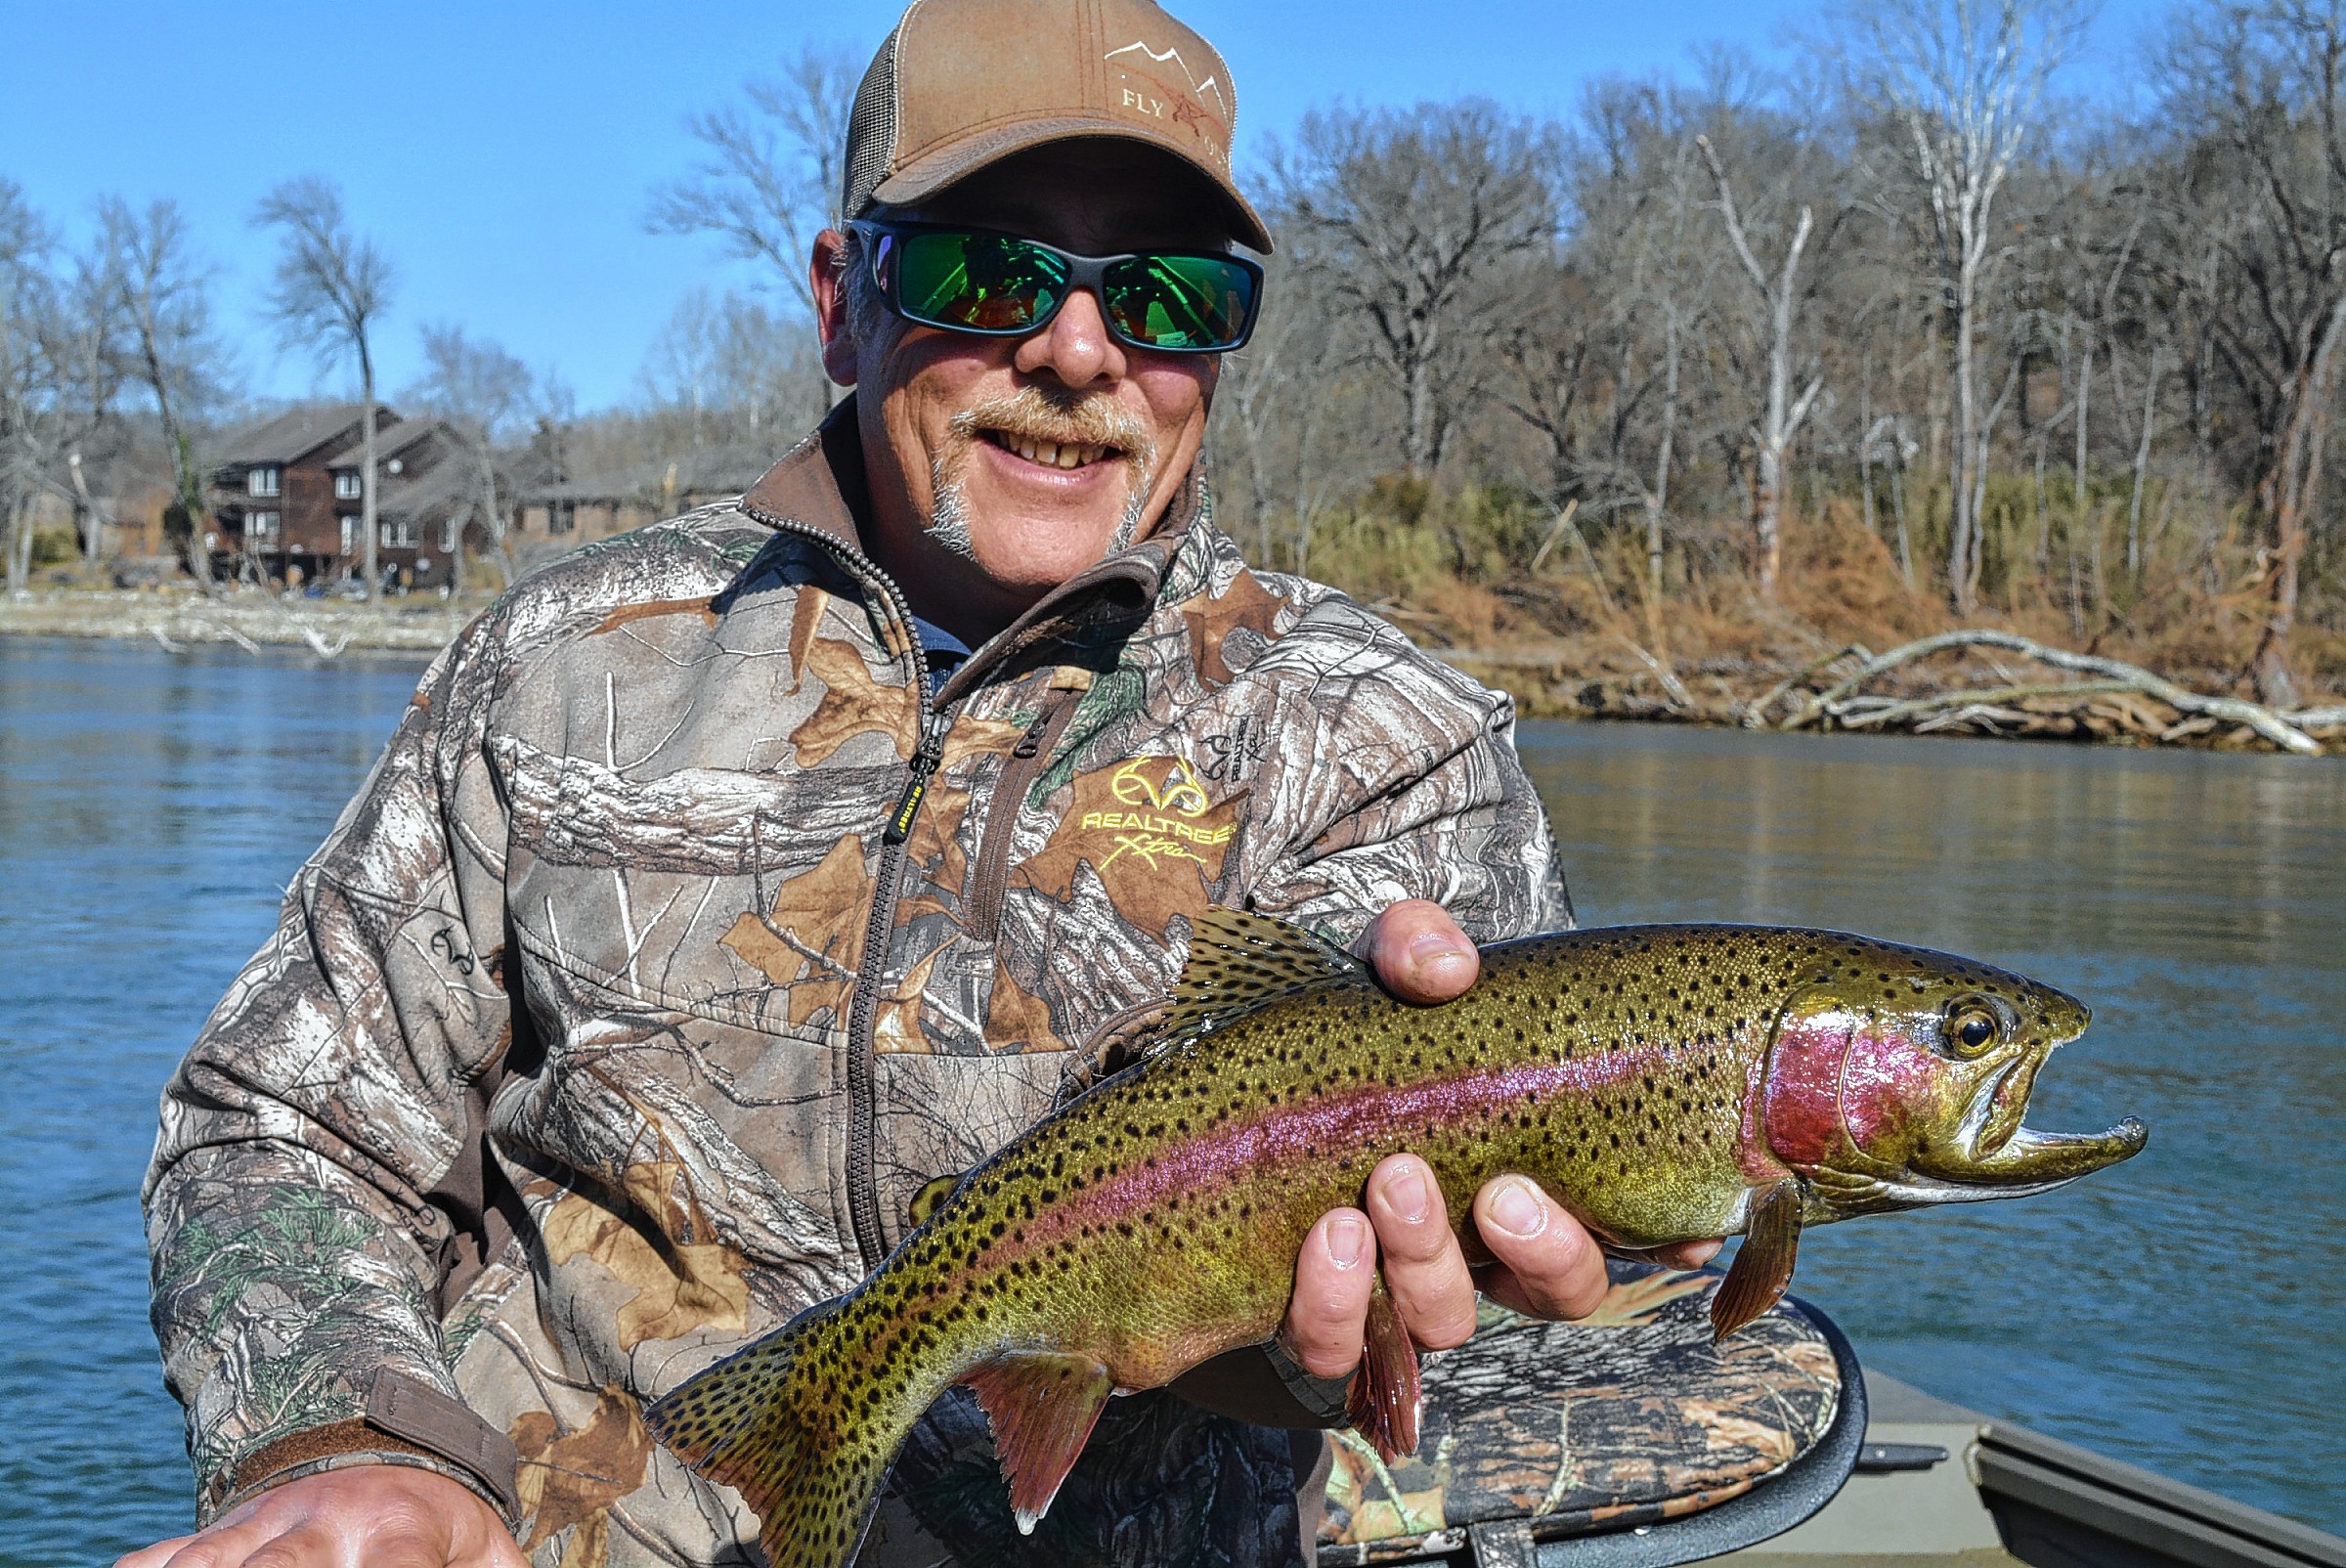 Duane Doty, a guide at Lake Taneycomo, will tell you that the fishing for big rainbows has excelled in the aftermath of a late-December flood at the Ozarks reservoir. (Brent Frazee/Kansas City Star/TNS)